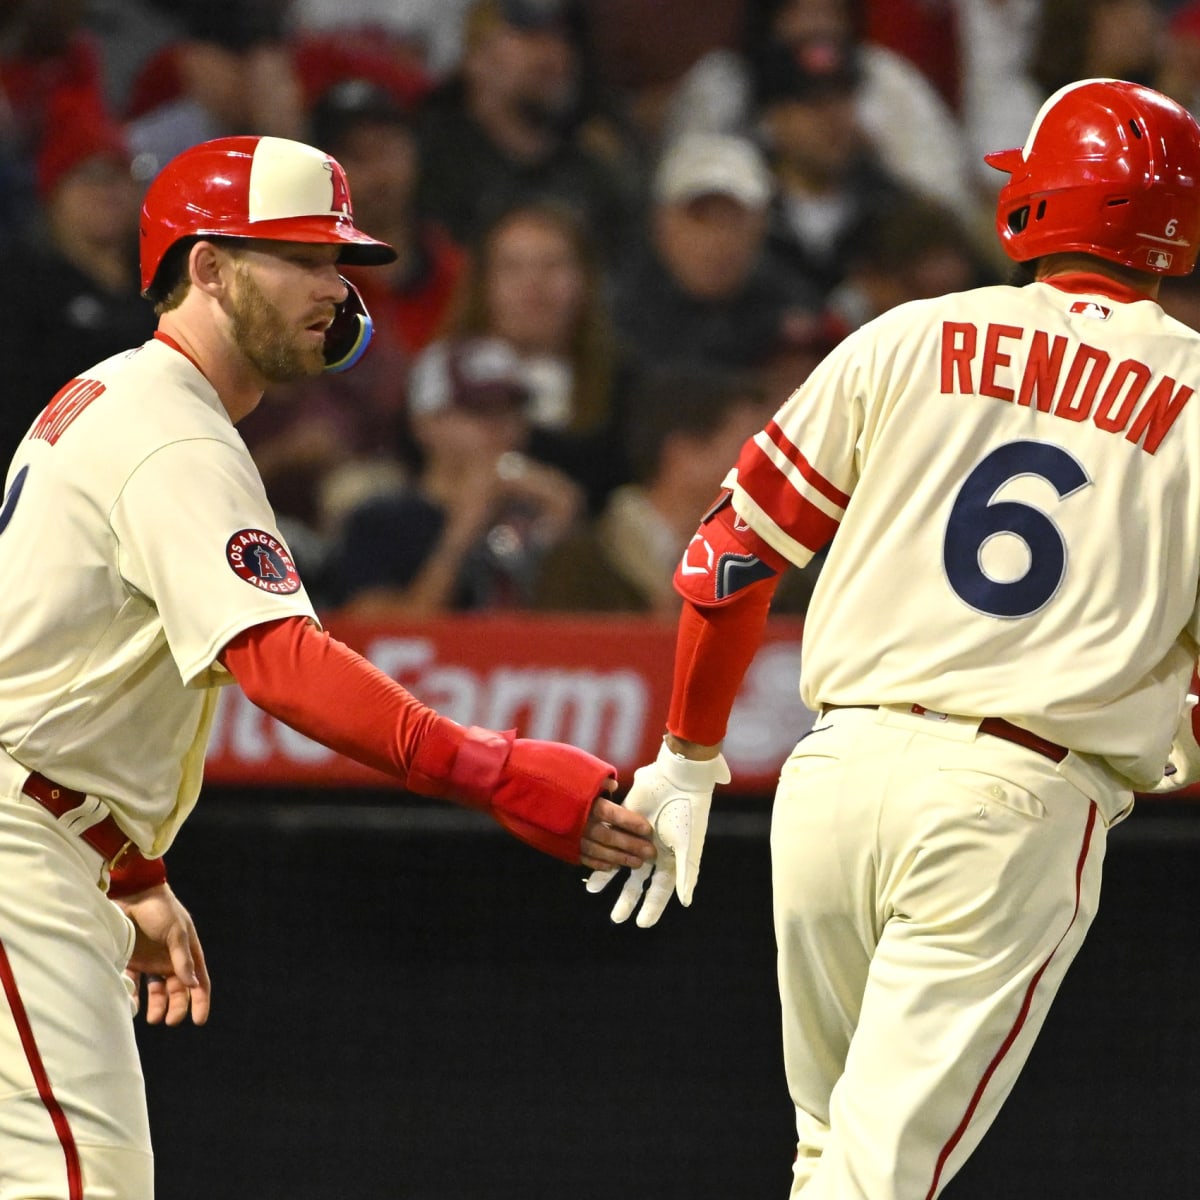 MLB investigating Anthony Rendon incident with fan after Angels